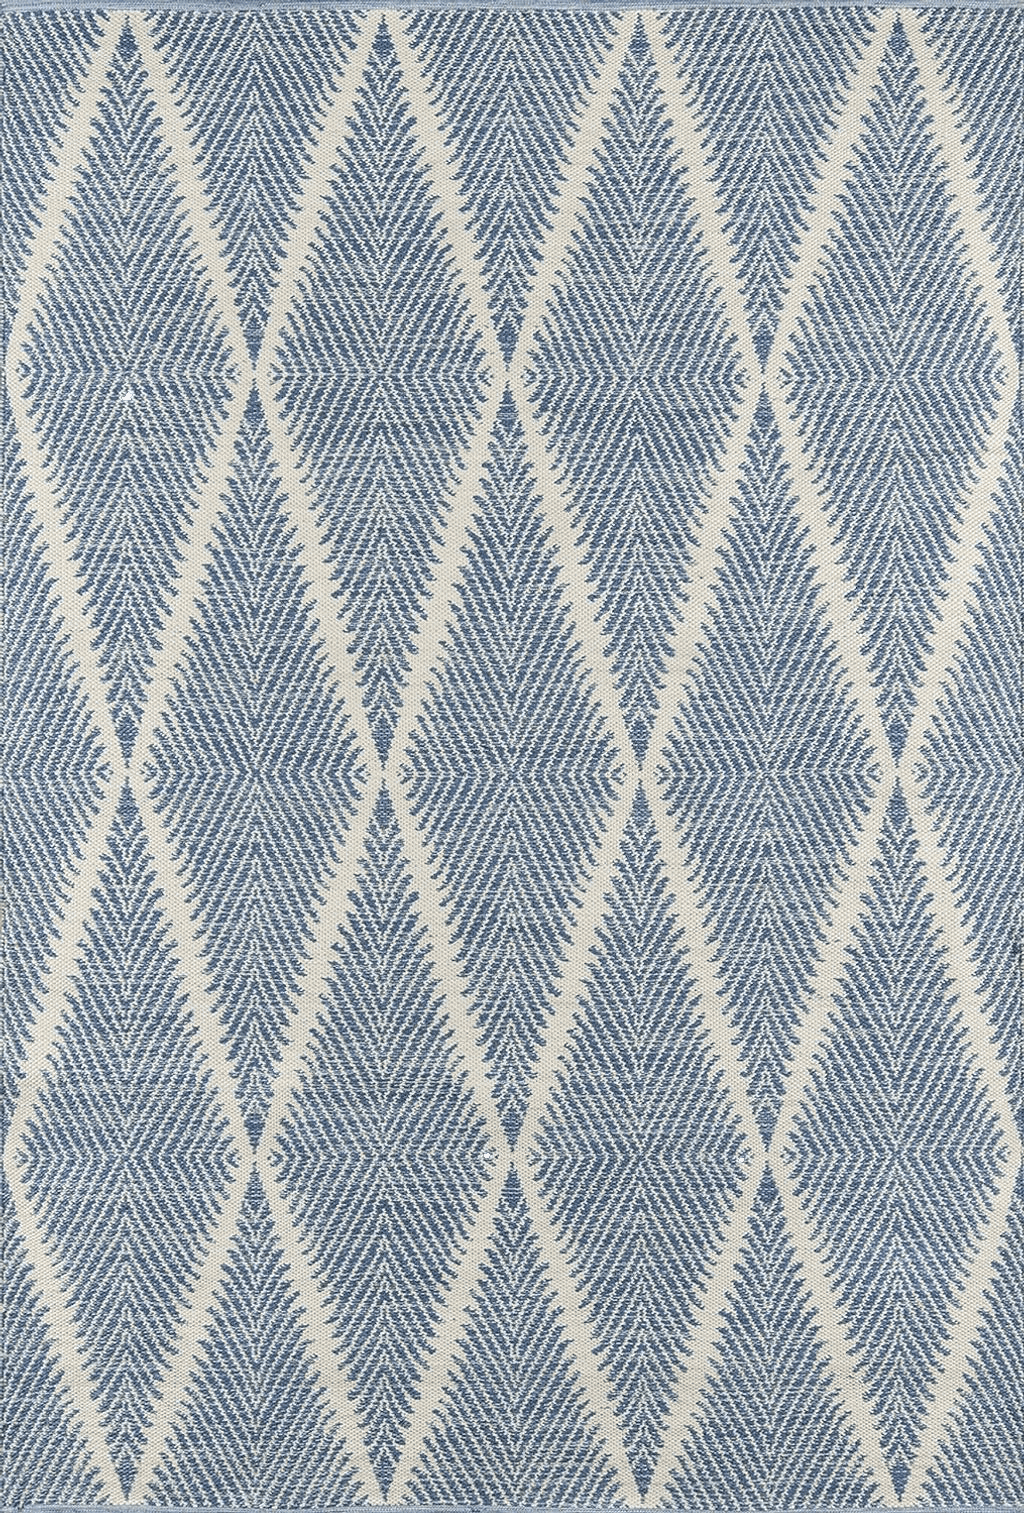 Erin Gates by Momeni River Beacon Denim Hand Woven Indoor Outdoor Area Rug, 2'3" X 8' Size Mat for Living Room, Bedroom, Dining Room, Nursery, Hallways, and Home Office